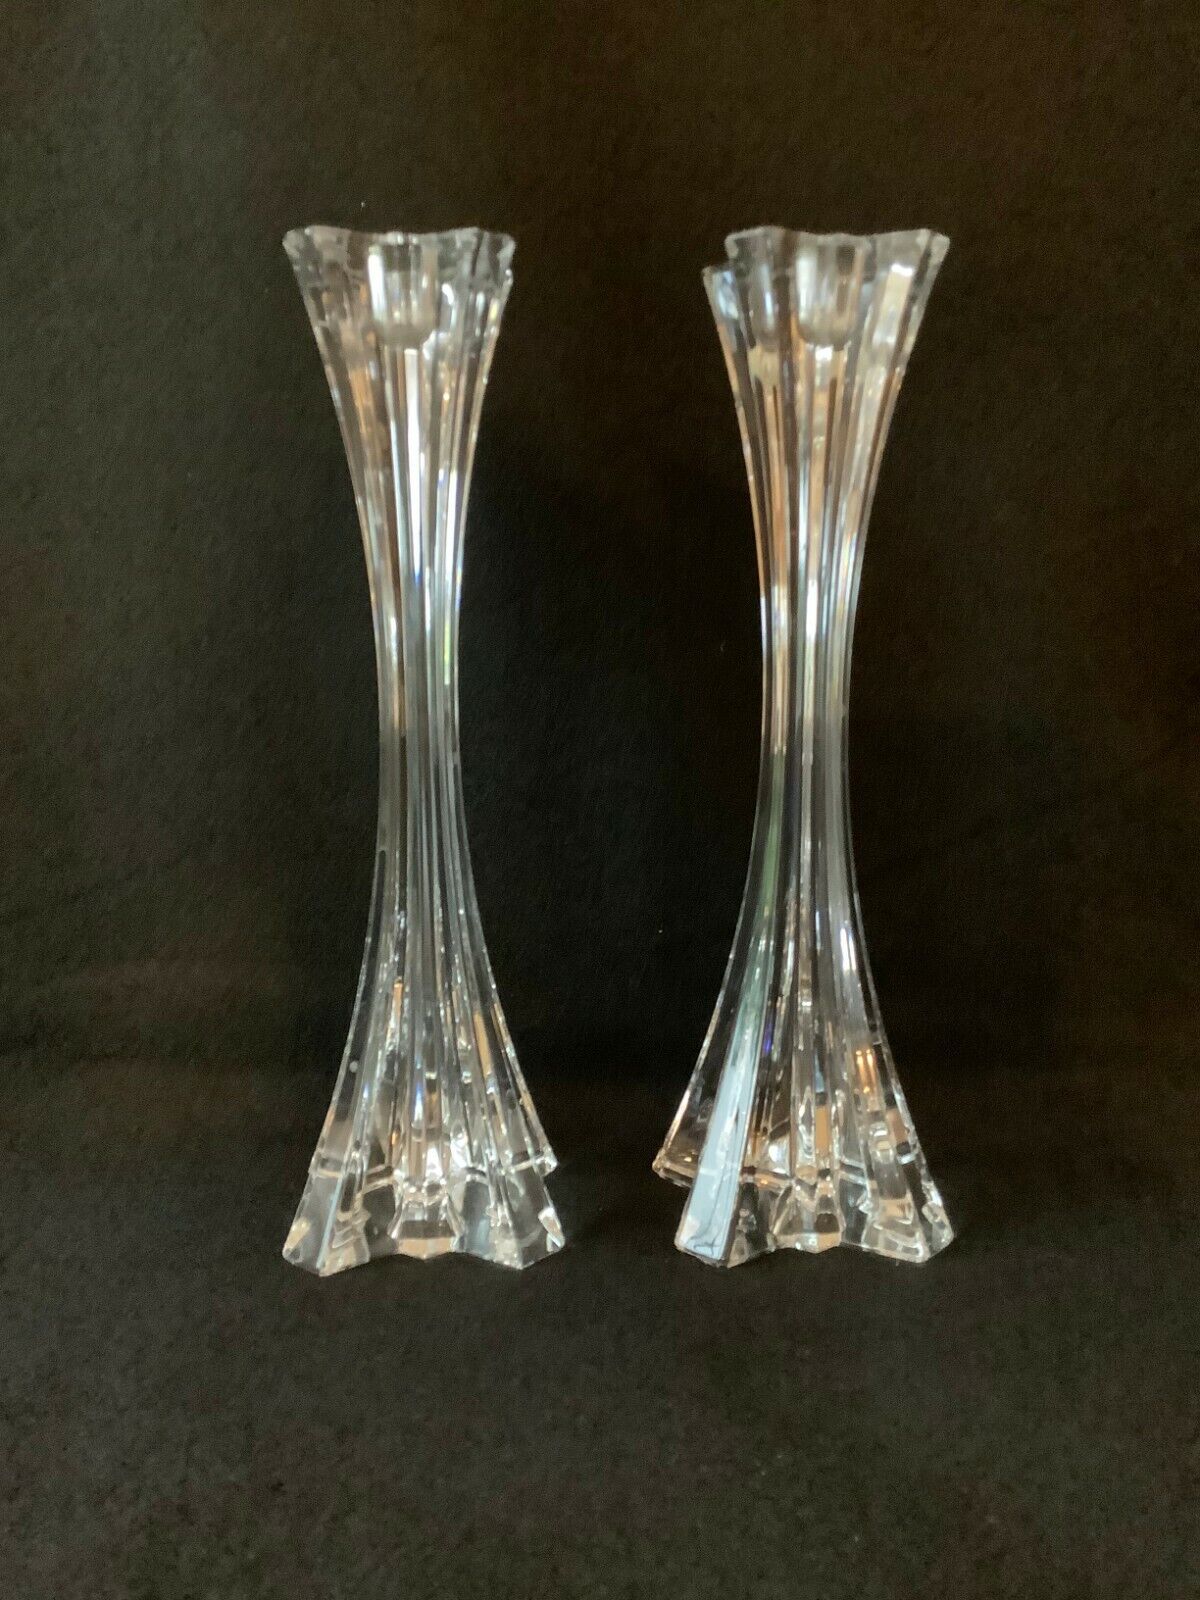 Princess House Crystal 9 inch Tall Candle Sticks Elegant Vintage Candle Holders